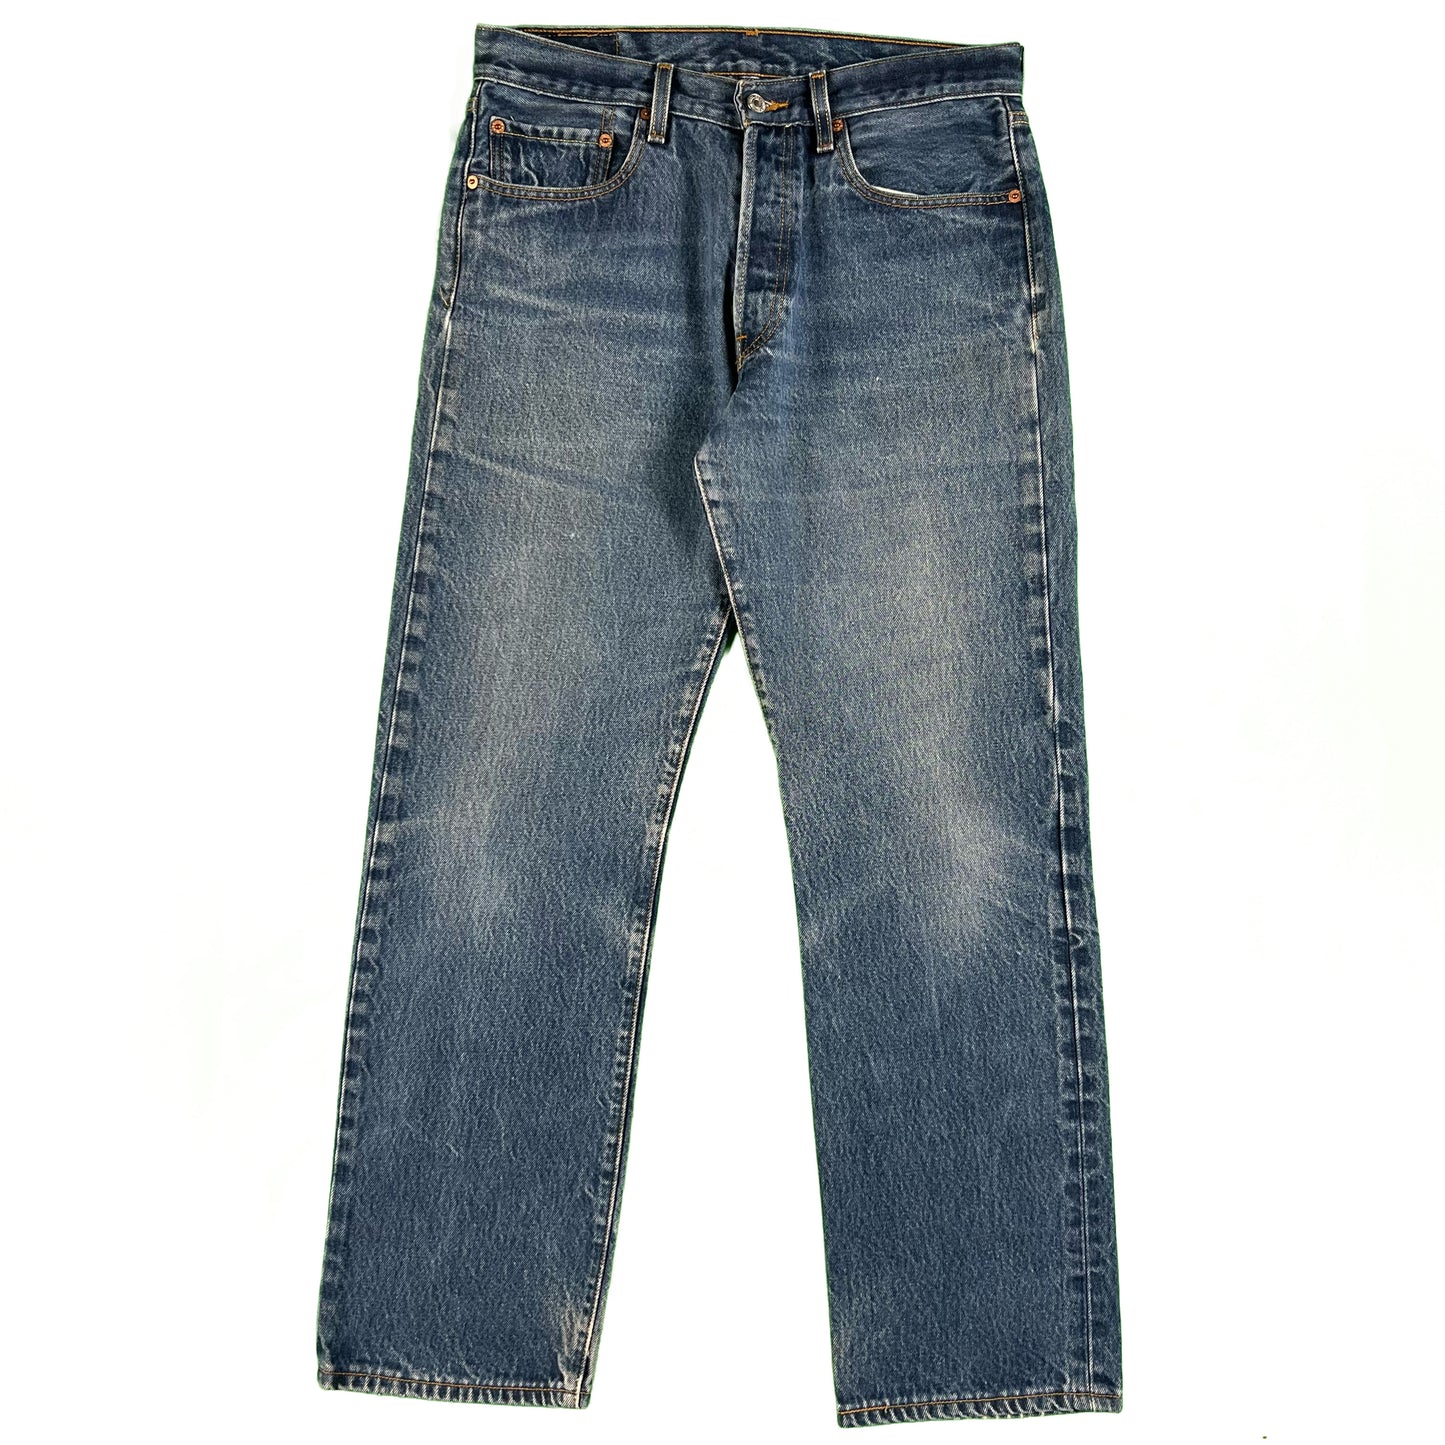 00s Levi's 501 2 Pack-(32x30)